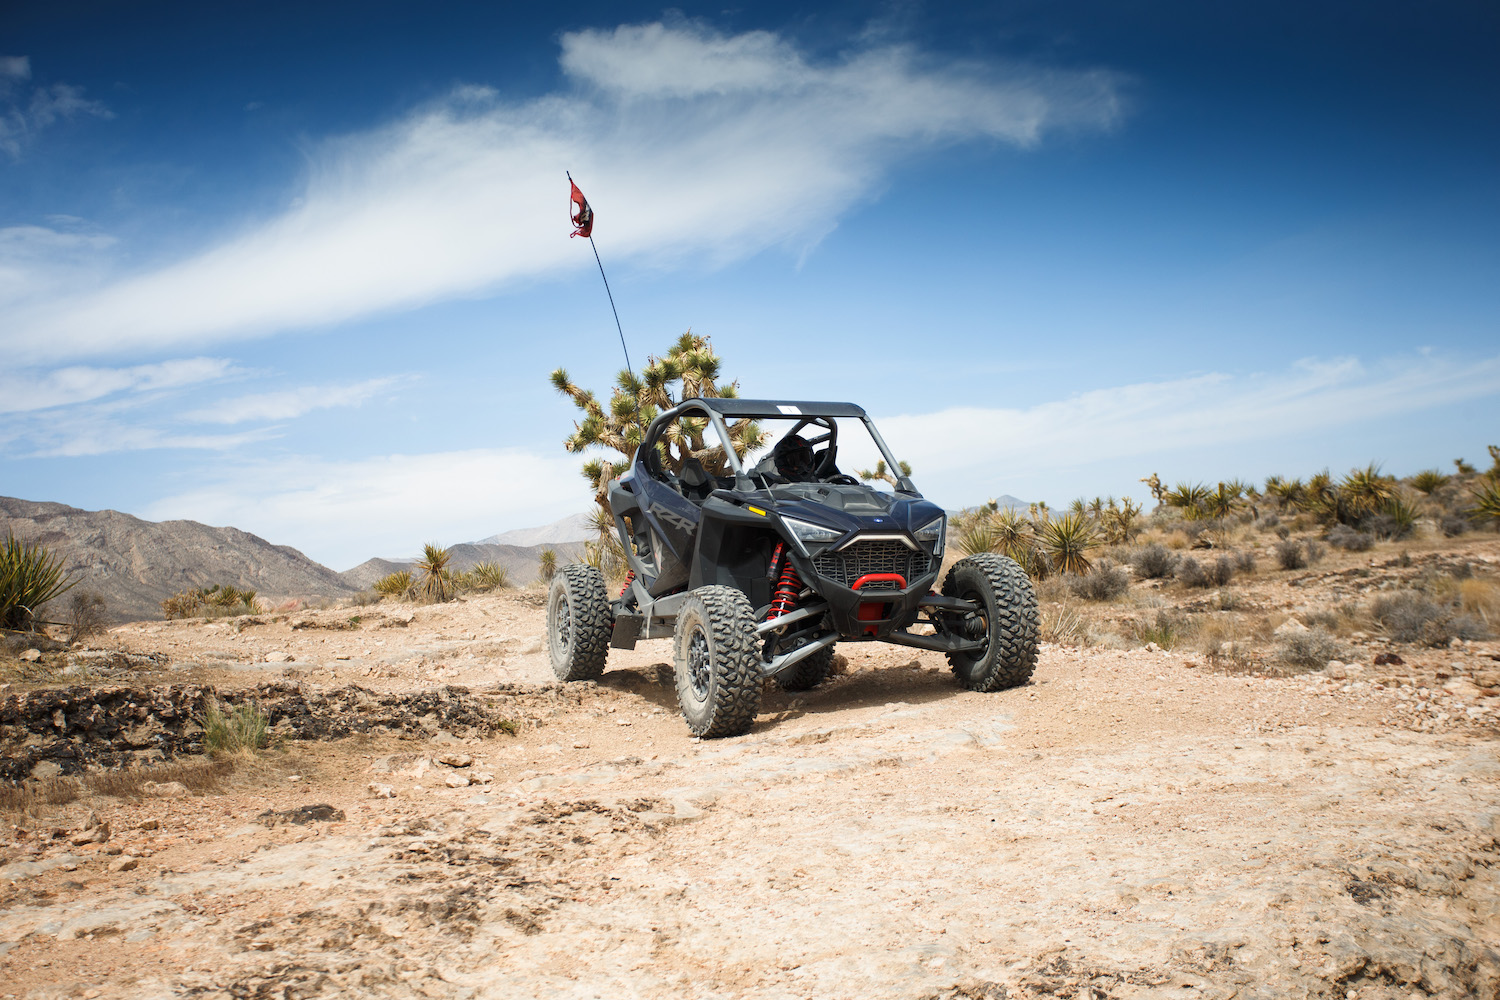 Close up of Polaris RZR Pro R front end driving through a dirt path in the desert.